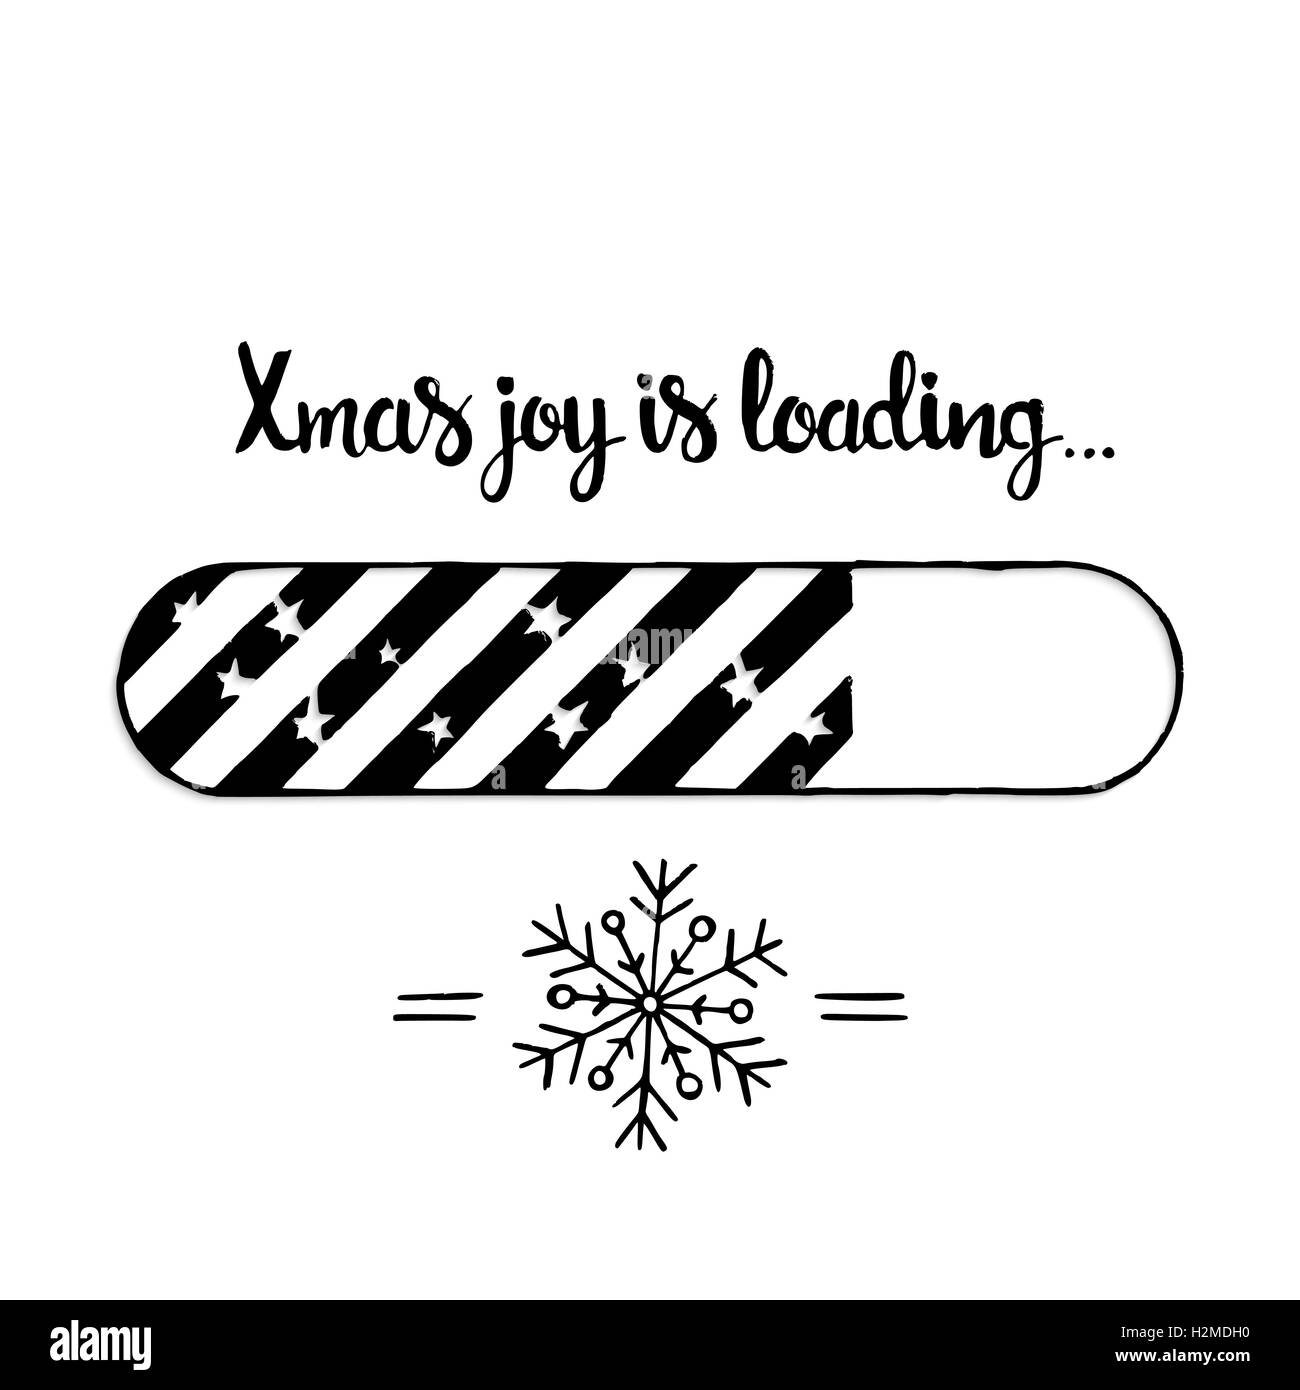 Xmas joy is loading lettering. Modern vector hand drawn calligraphy with christmas snowflake and loading bar isolated on white b Stock Vector